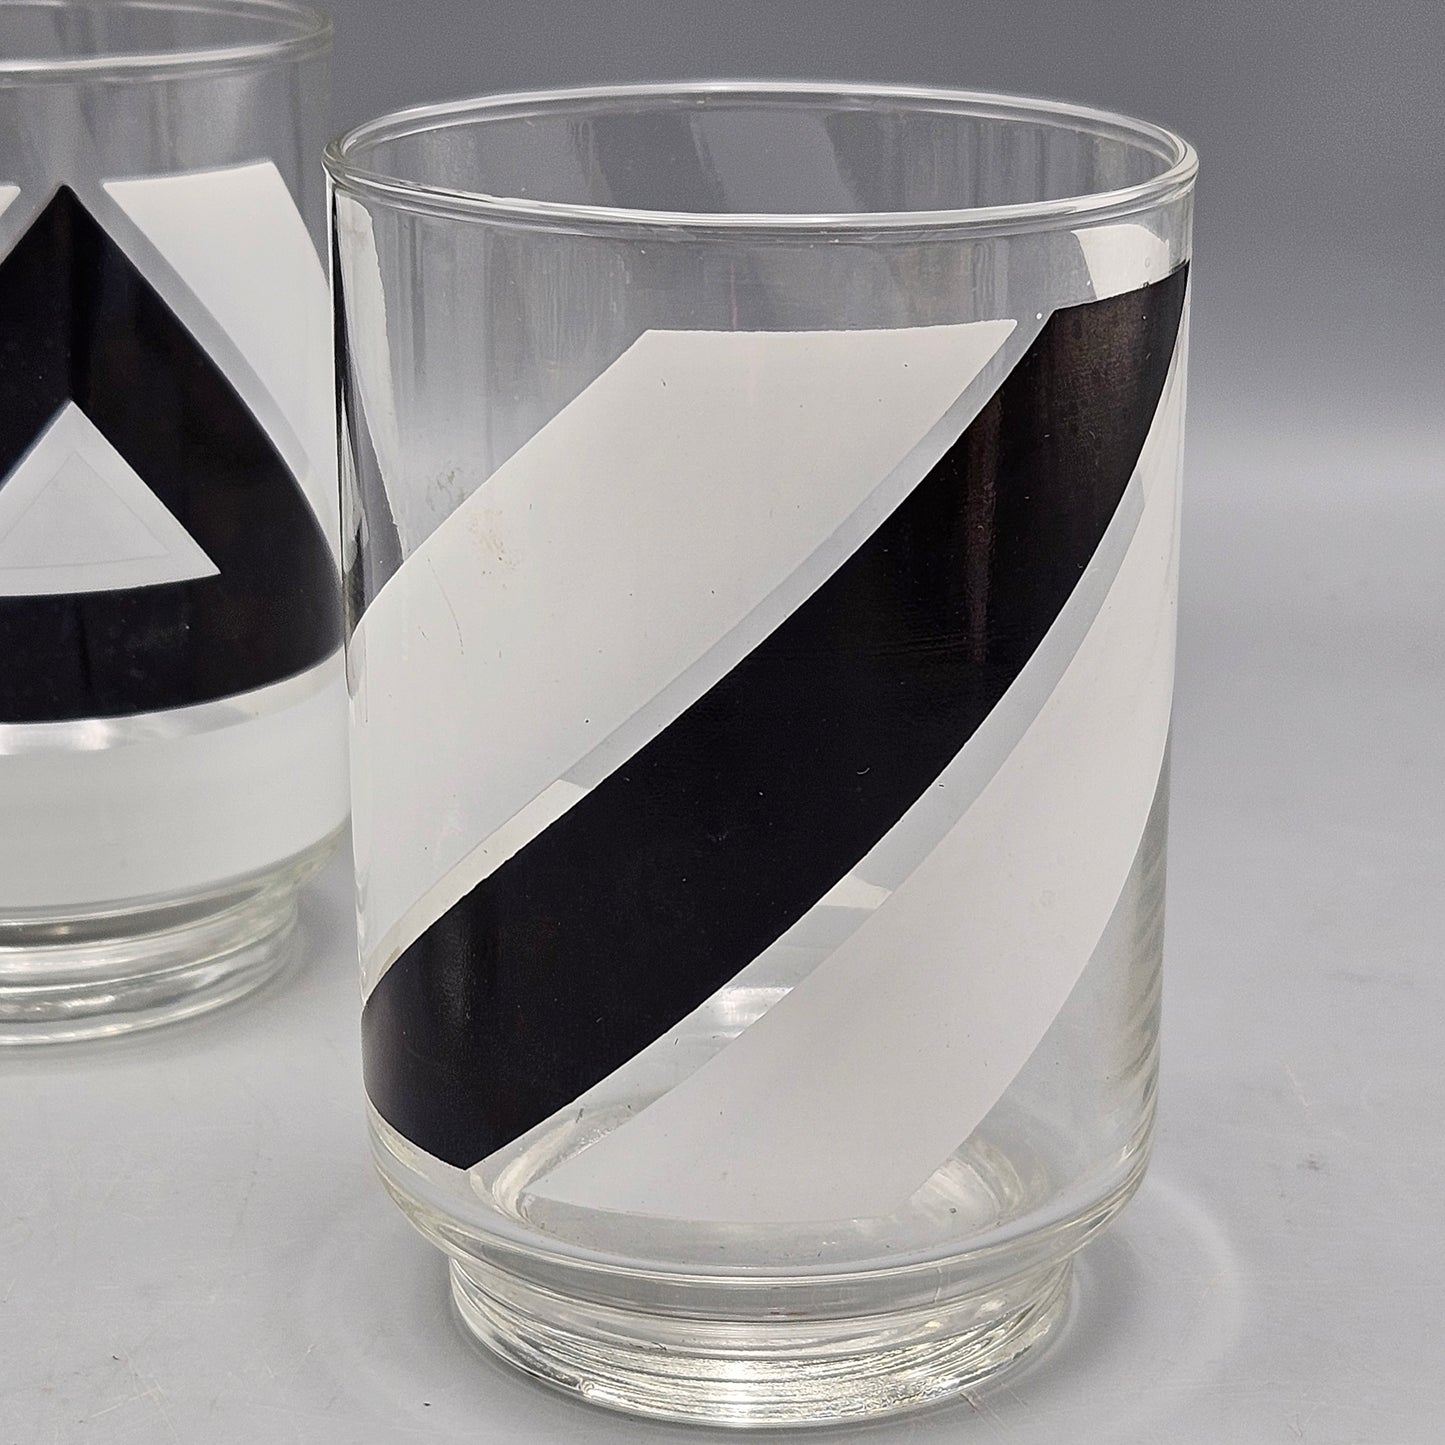 Set of 4 Vintage Libbey Glass, Black and White Geometric Shapes Cocktail Glasses